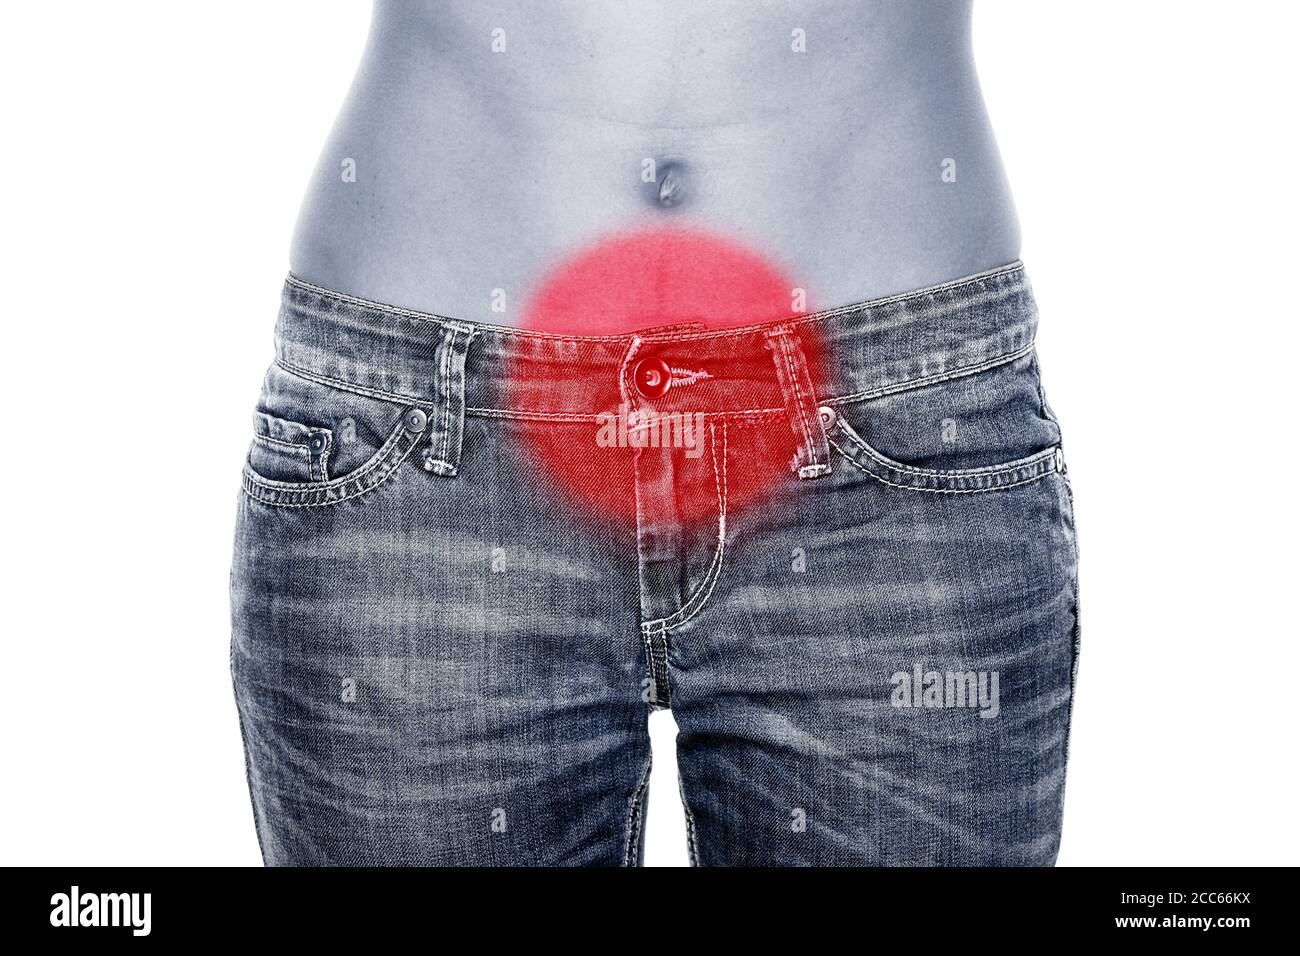 Stomach pain woman with red circle targeting painful area on lower abdomen body. Medical health care of pms menstruation cramp issue Stock Photo